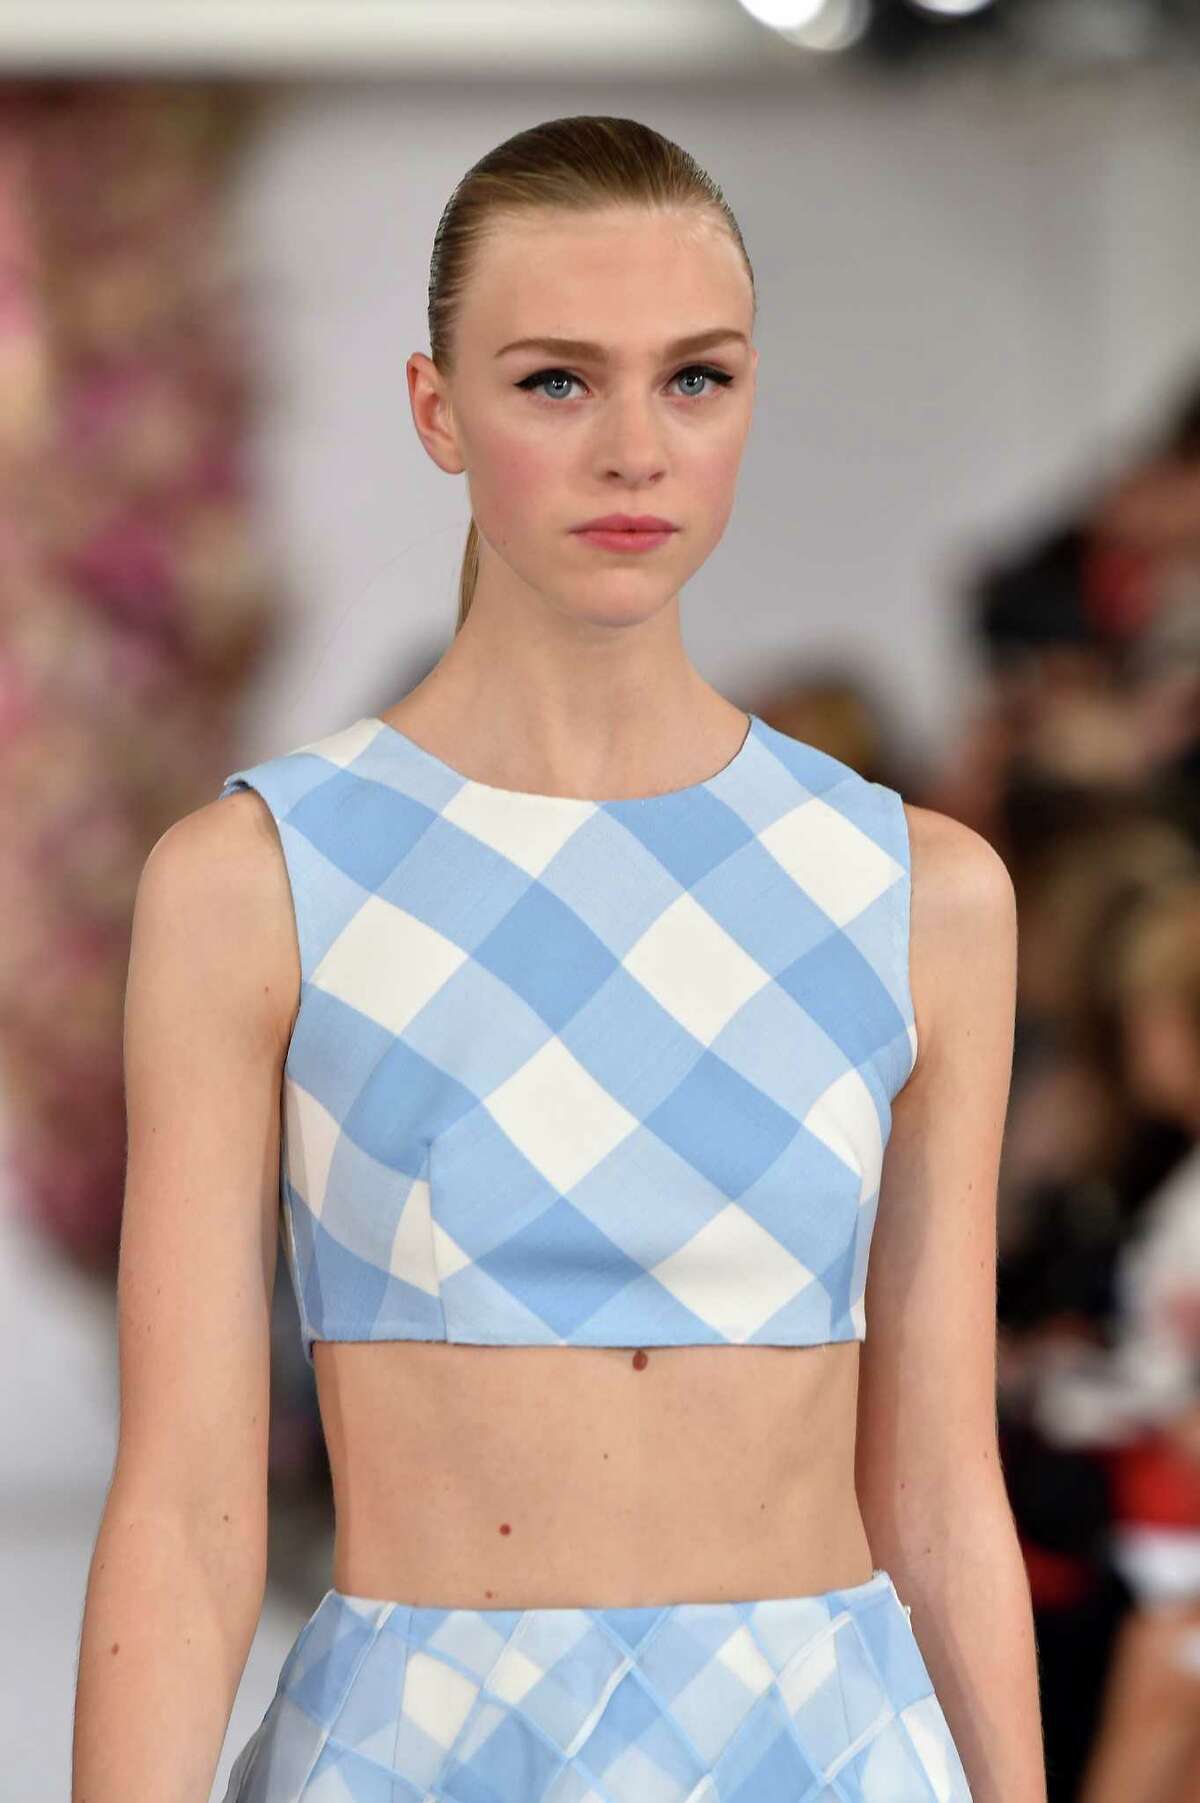 Gingham is predicted to be the print of the spring season in dresses, skirts, tops, jackets and long coats as seen in this look from Oscar de la Renta.